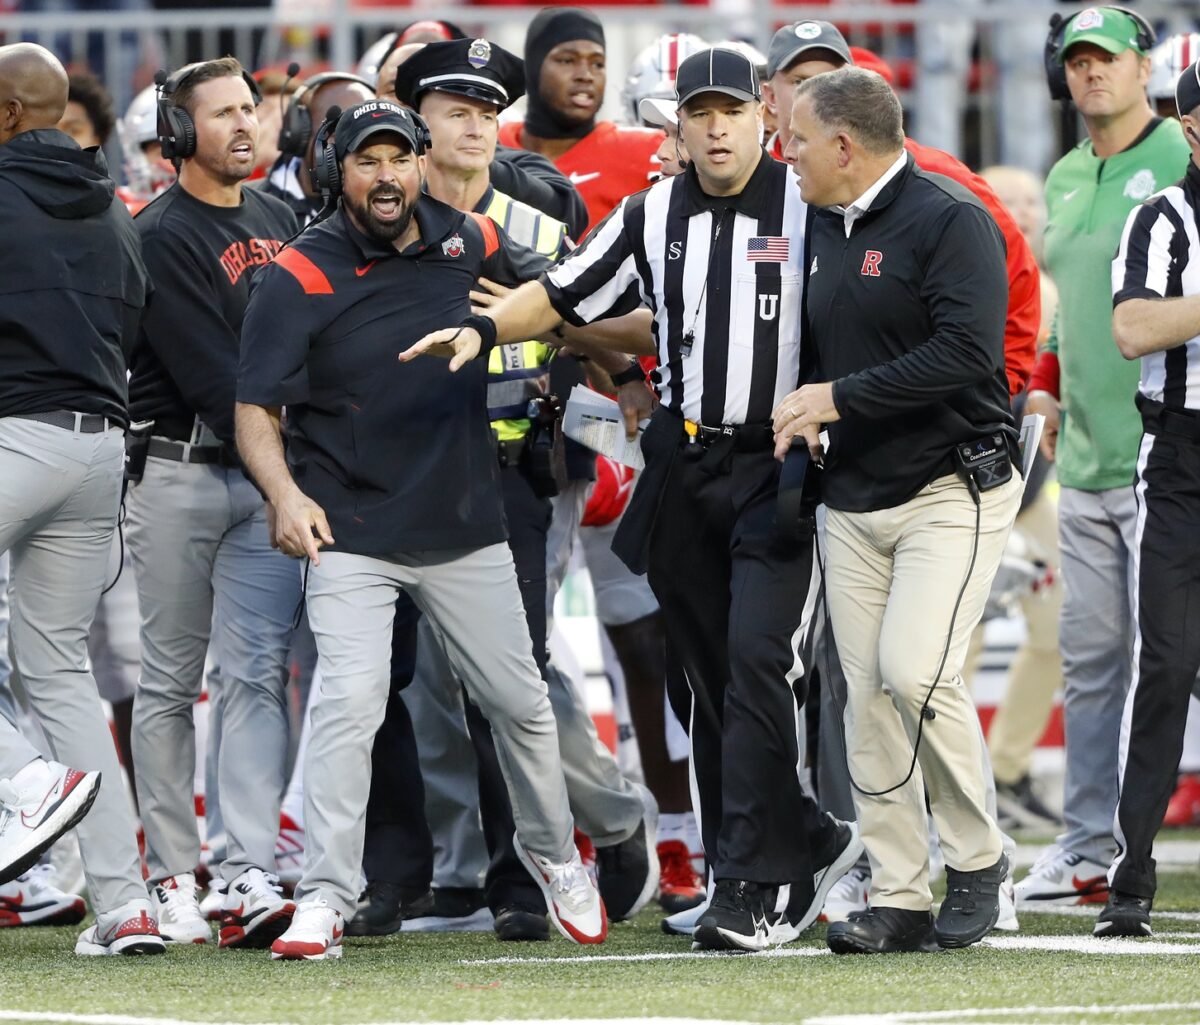 Watch: Ohio State’s Ryan Day, Rutgers’ Greg Schiano shake hands following heated end to game